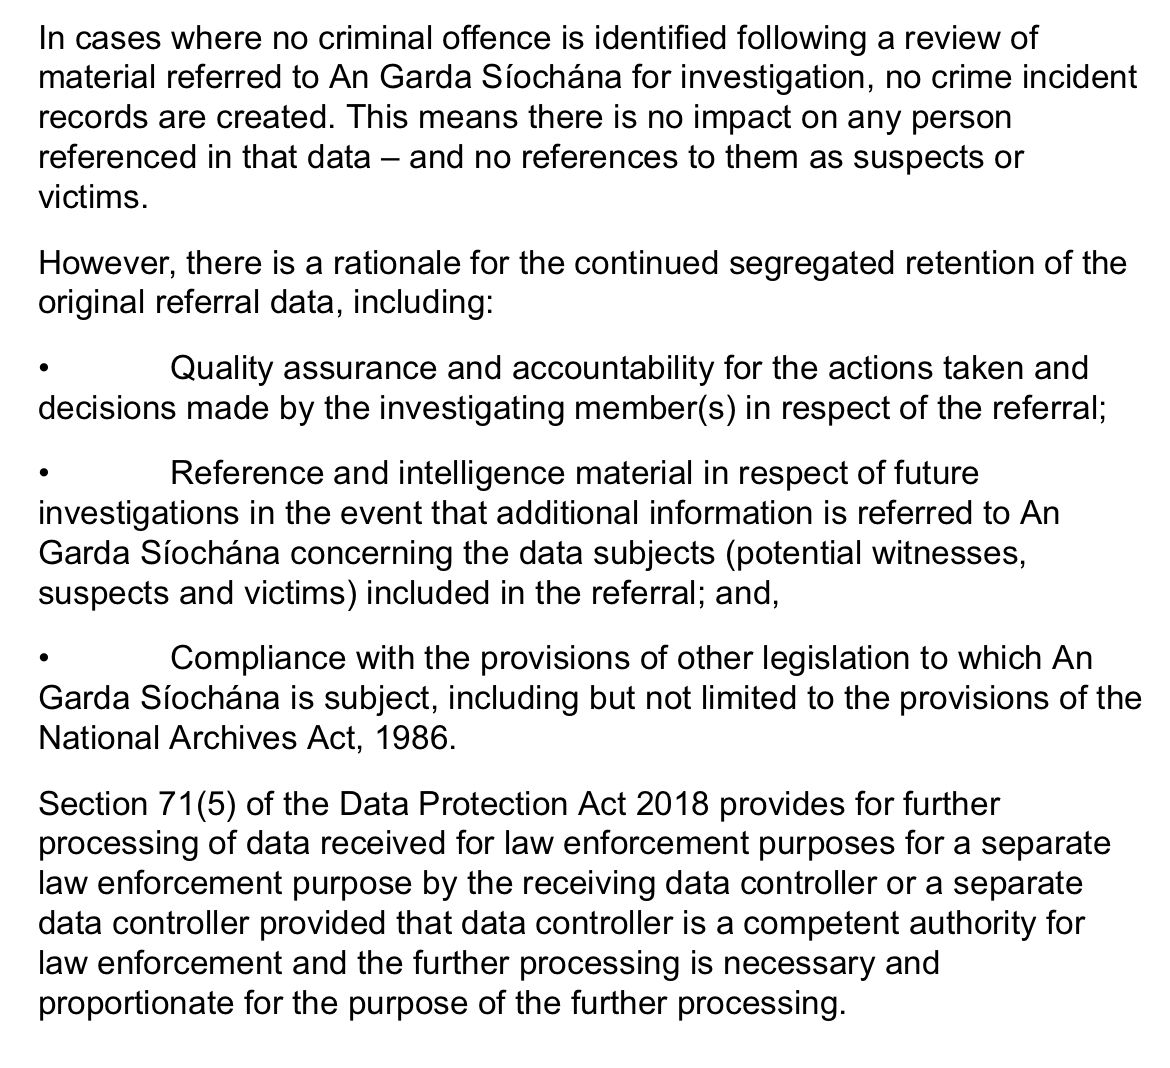 In cases where no criminal offences identified following a review of material referred to An Garda Síochana for investigation, no crime incident records are created. This means that there is no impact on any person referenced in the data- and no references to them as suspects or victims.  However, there is a rationale for the continued segregated retention of the original referral data, including:  * quality assurance and accountability for the actions taken and decisions made in respect of the referral; * Reference and intelligence material in respect of future investigations in the event that additional information concerning the data subjects (potential witnesses, suspects and victims) included in the referral; and, * Compliance with the provisions of other legislation to which An Garda Síochána is subject, including but not limited to the provisions of the National Archives Act 1986.  Section 71(5) of the Data Protection Act 2018, provides for further processing of data, received for law enforcement purposes, for a separate law enforcement purpose by the receiving controller or a separate data controller provided that data controller is a competent, authority for law enforcement, and the processing is necessary and proportionate for the purpose of the further processing